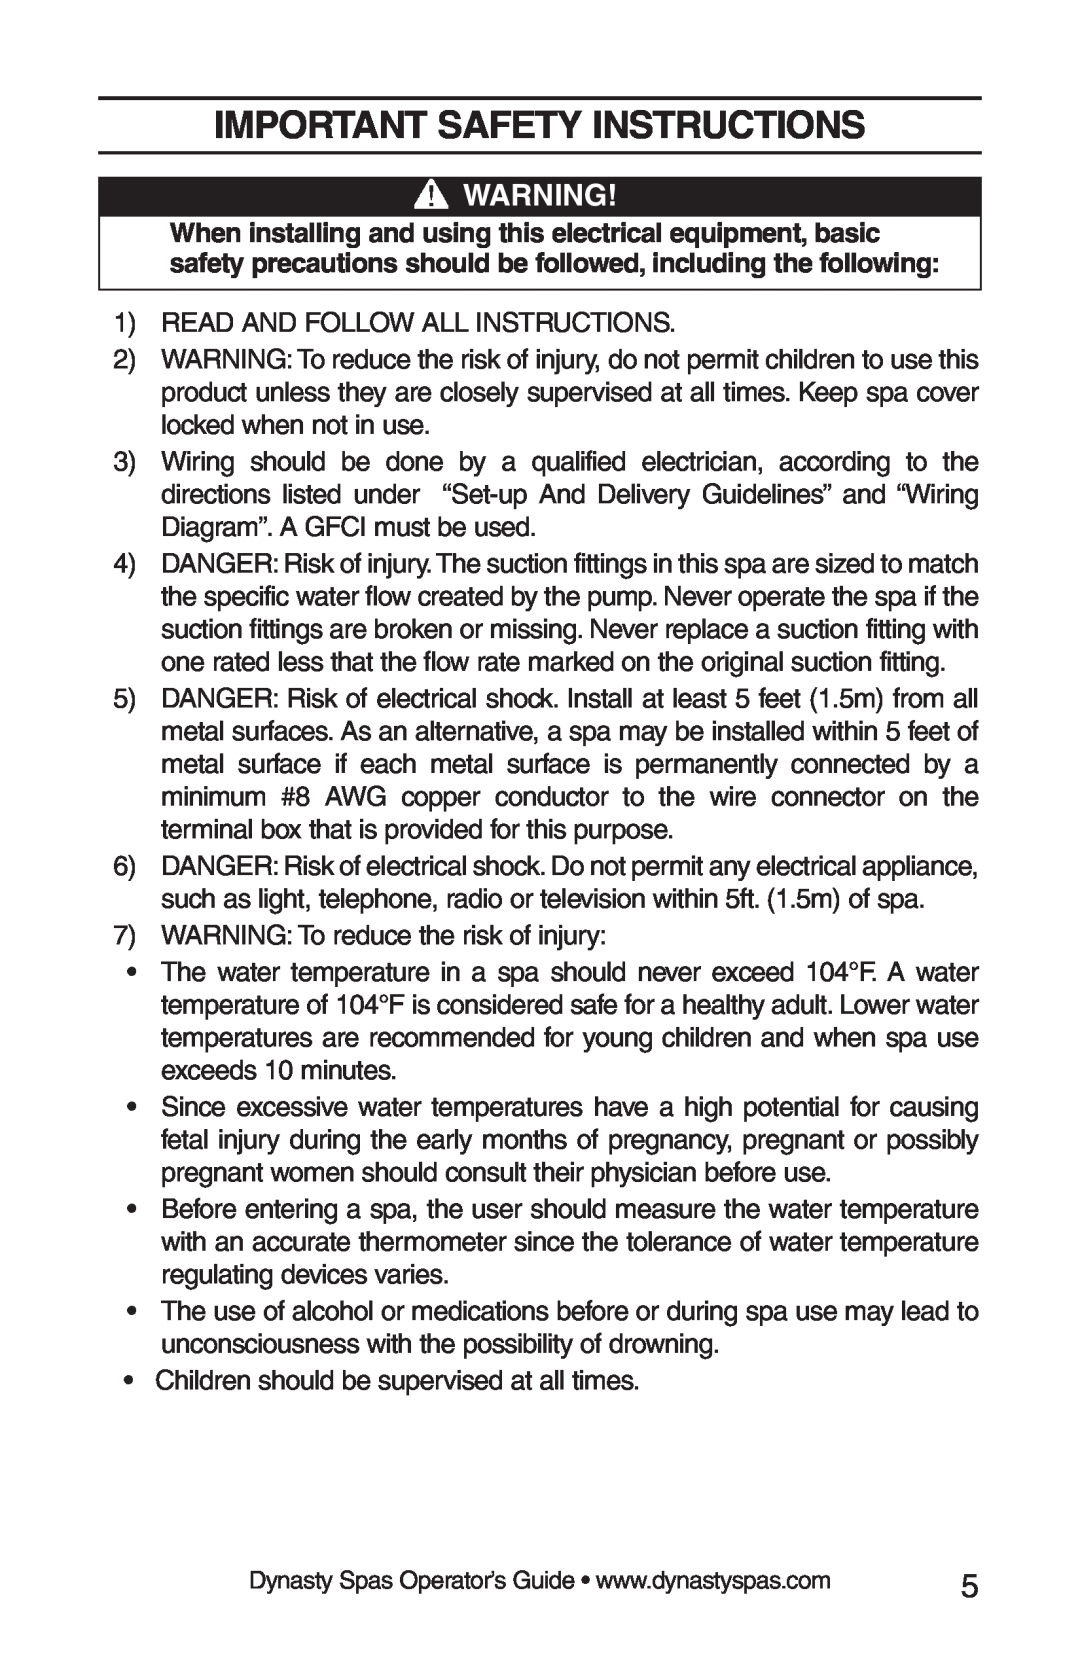 Dynasty Spas 2008 manual Important Safety Instructions 